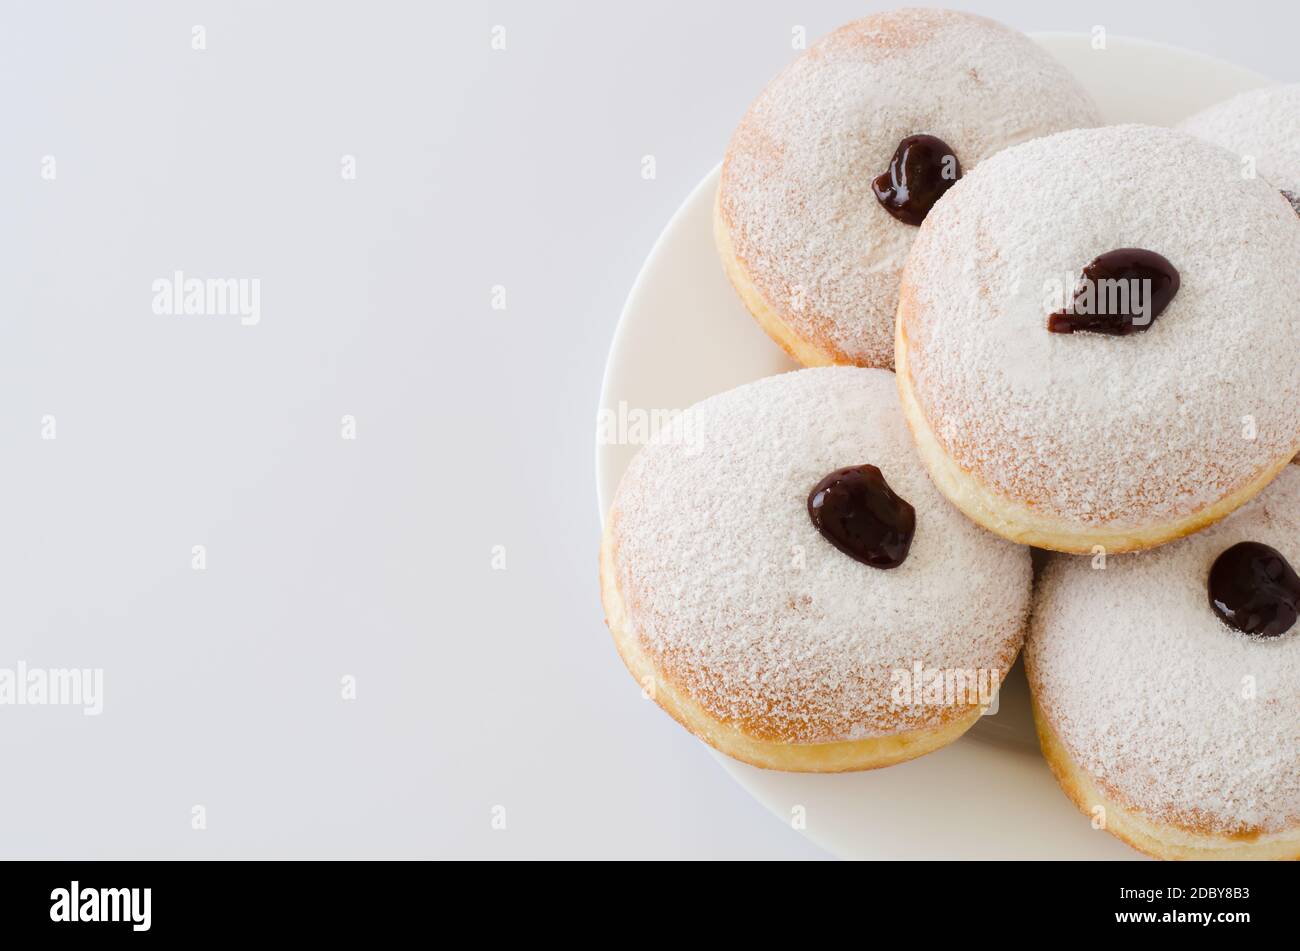 Traditional sweet donuts with powdered sugar and jam. Fat Thursday or Hanukkah celebration. Isolated on white. Stock Photo